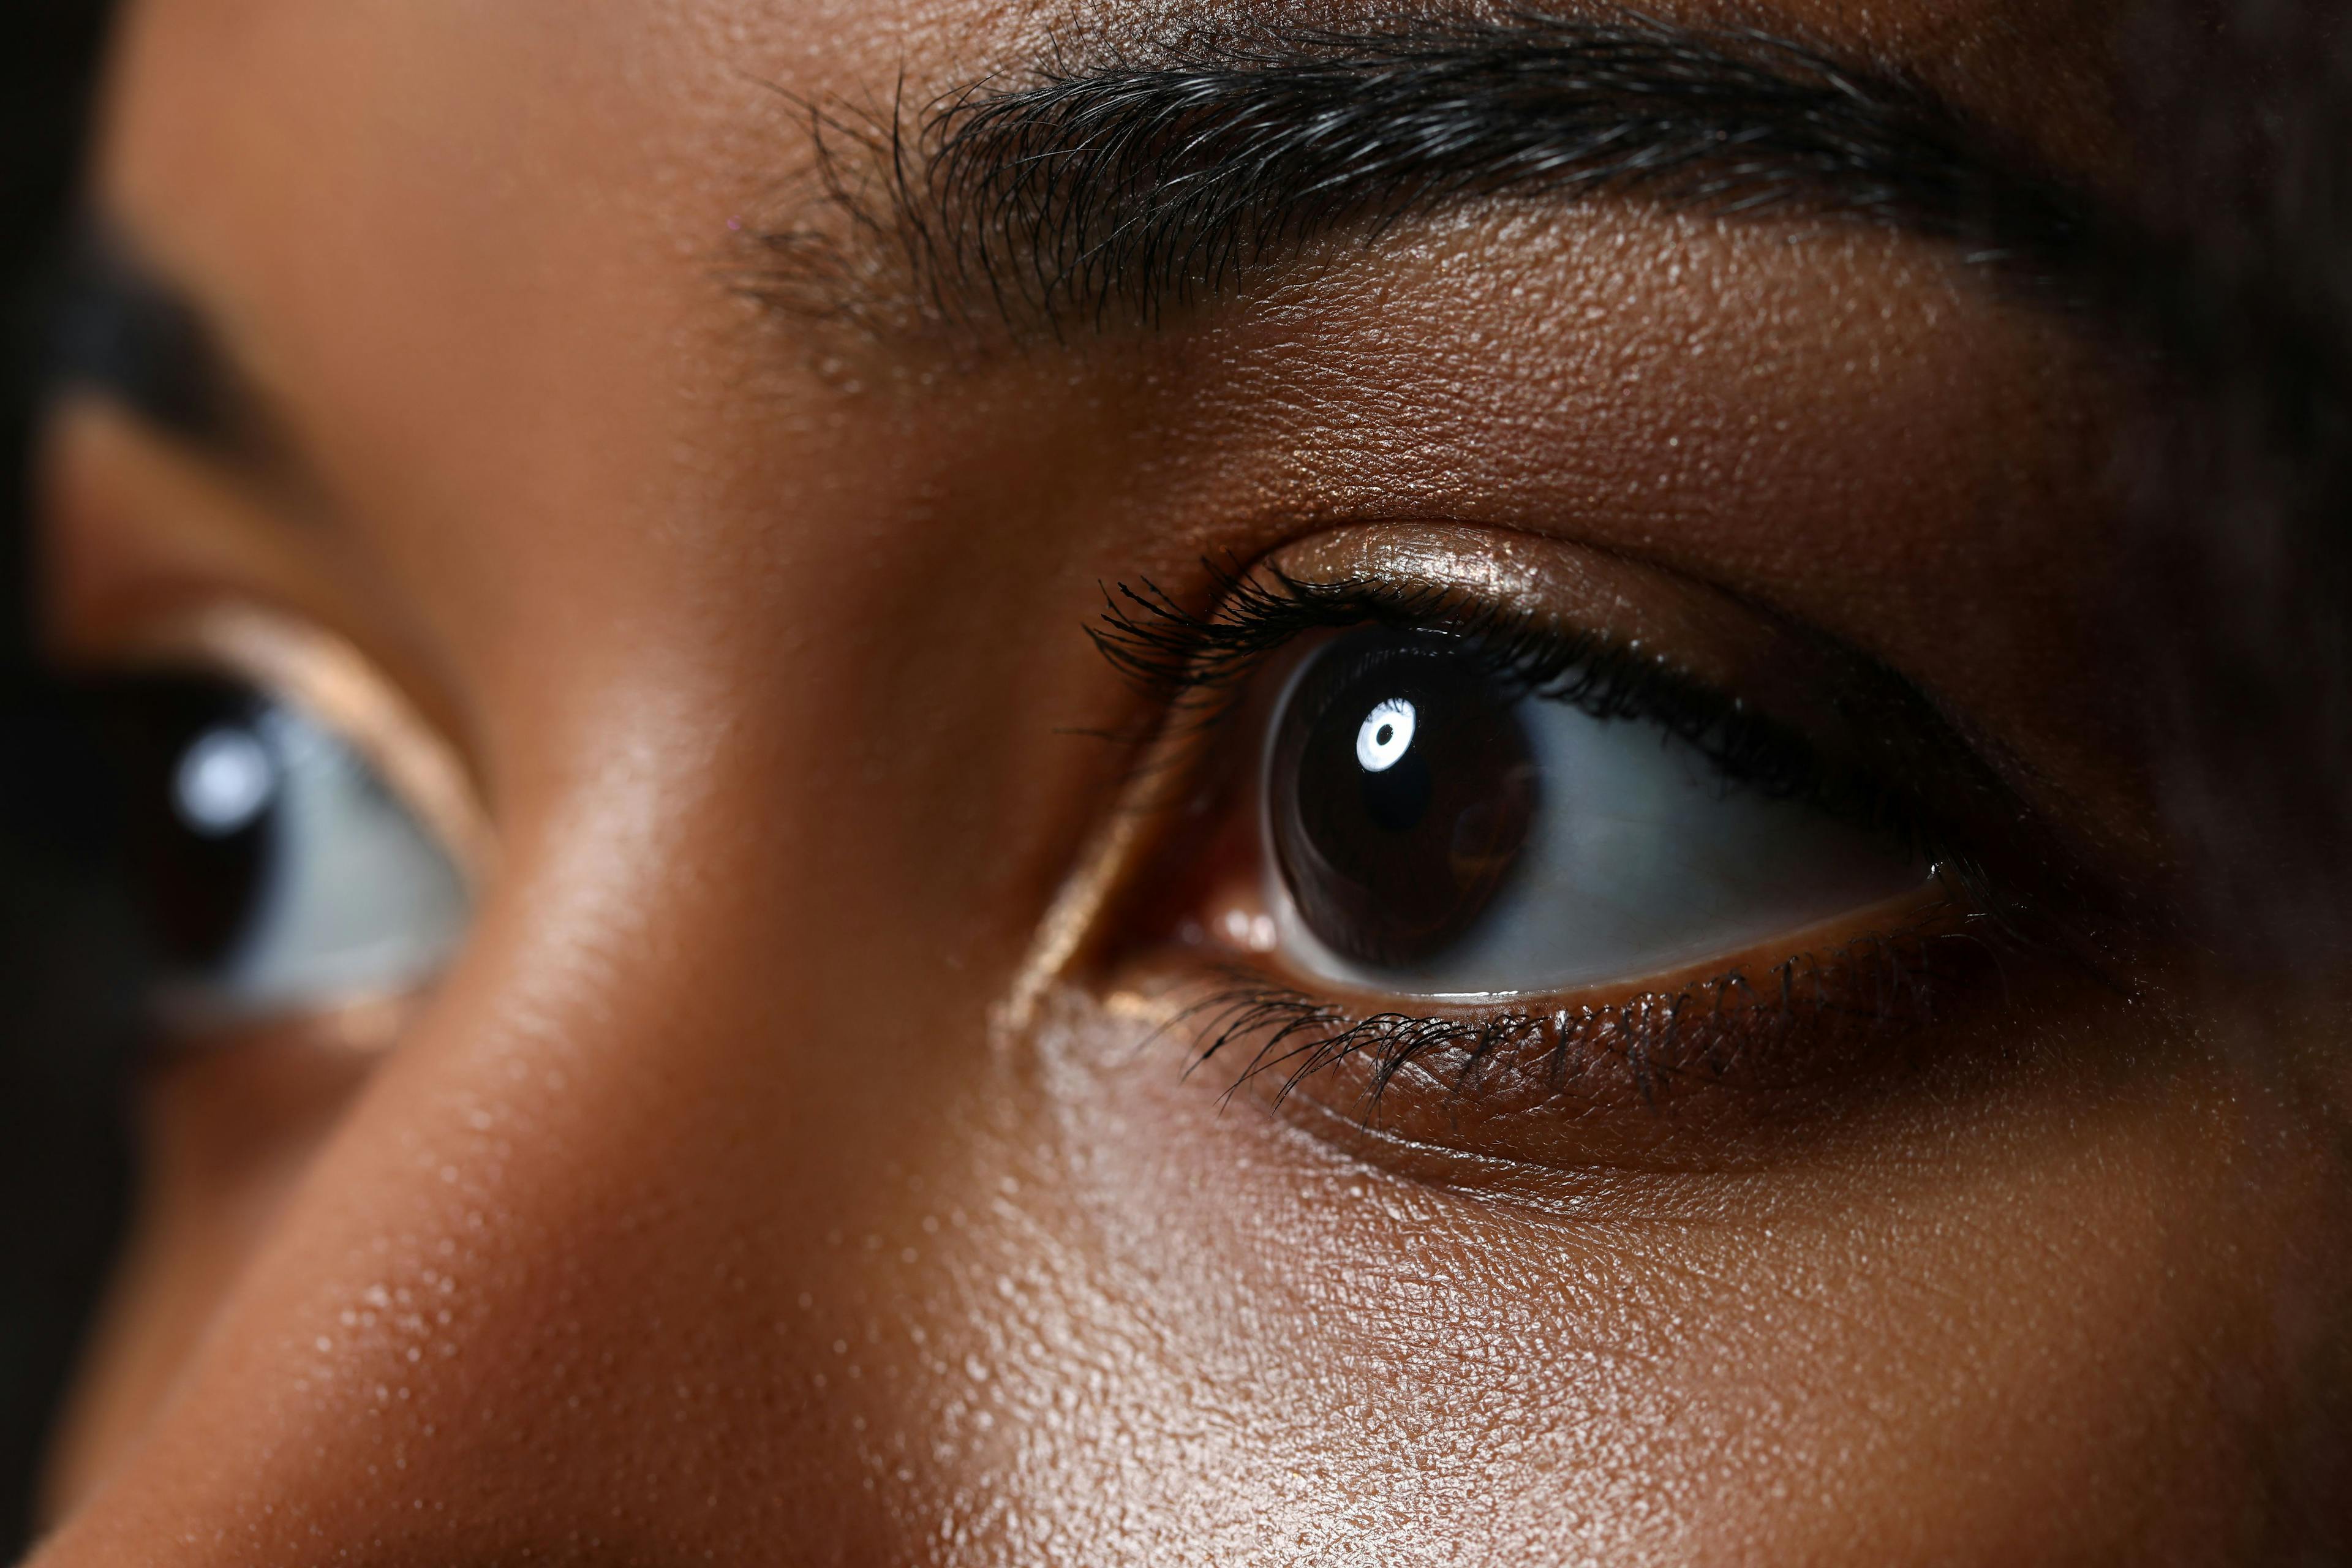 Healthcare Disparities in the US Amongst Those of Color With Glaucoma